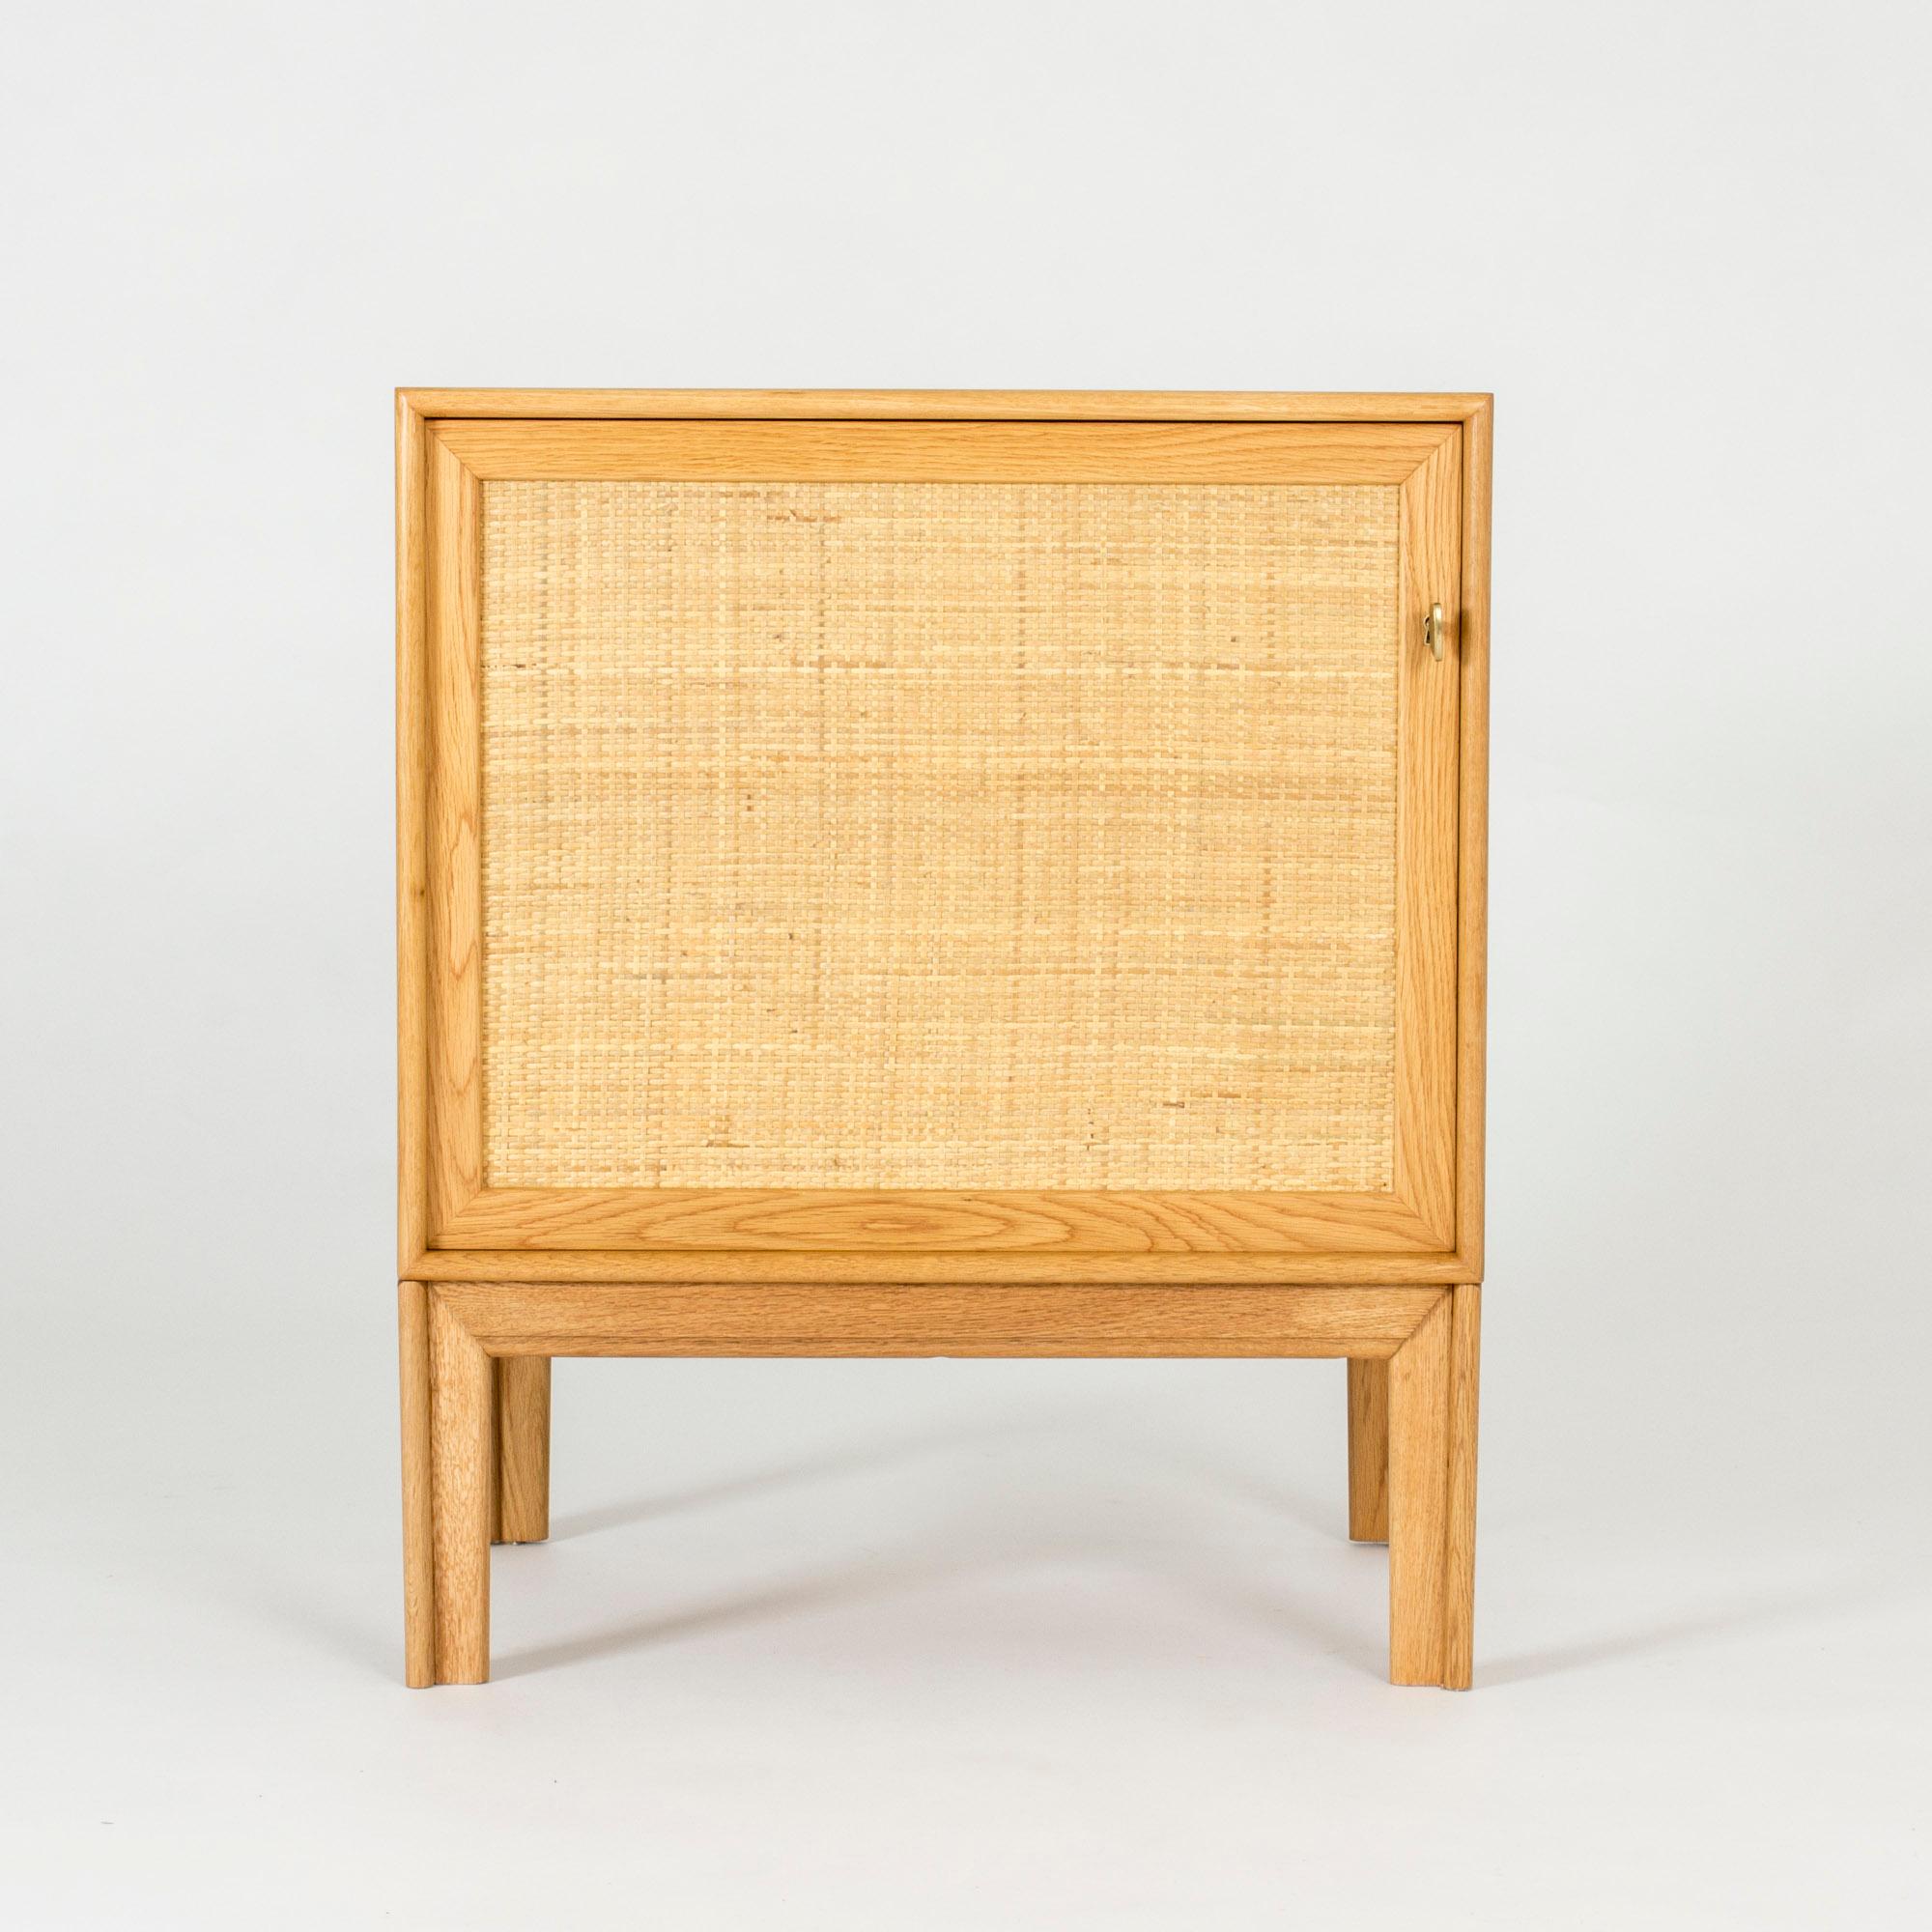 Neat oak cabinet by Alf Svensson. Made with a beautiful rattan front and with a large brass key.